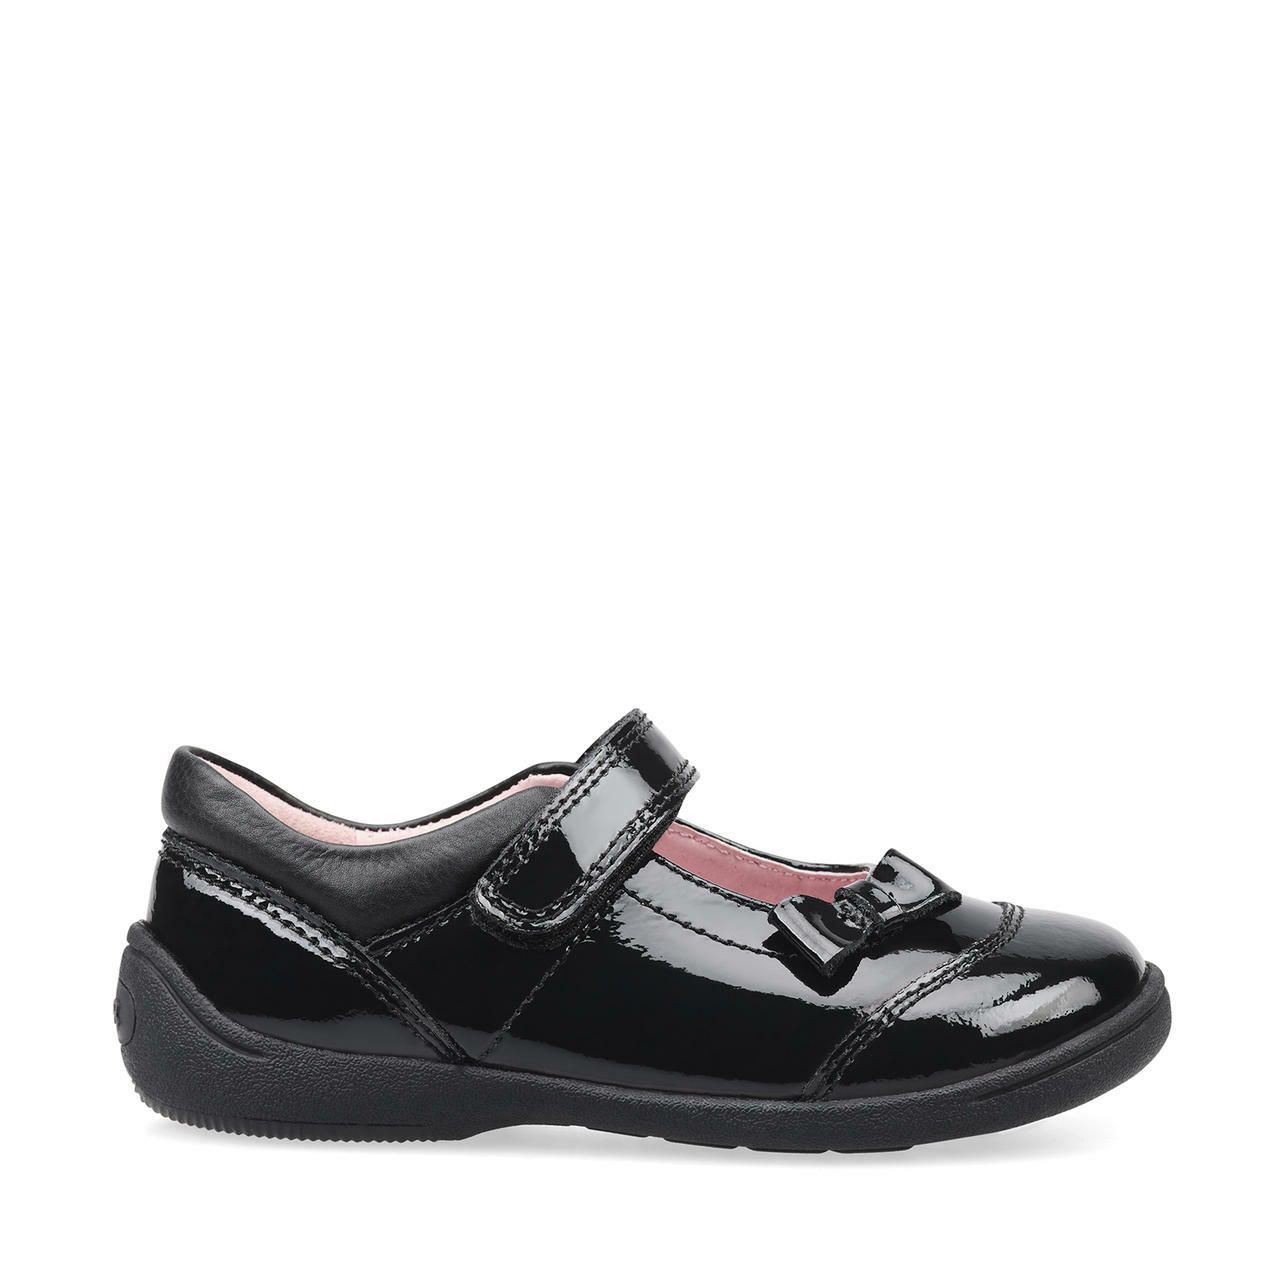 A girls pre school shoe by Start Rite, style Twizzle, in black patent with velcro fastening. Right side view.